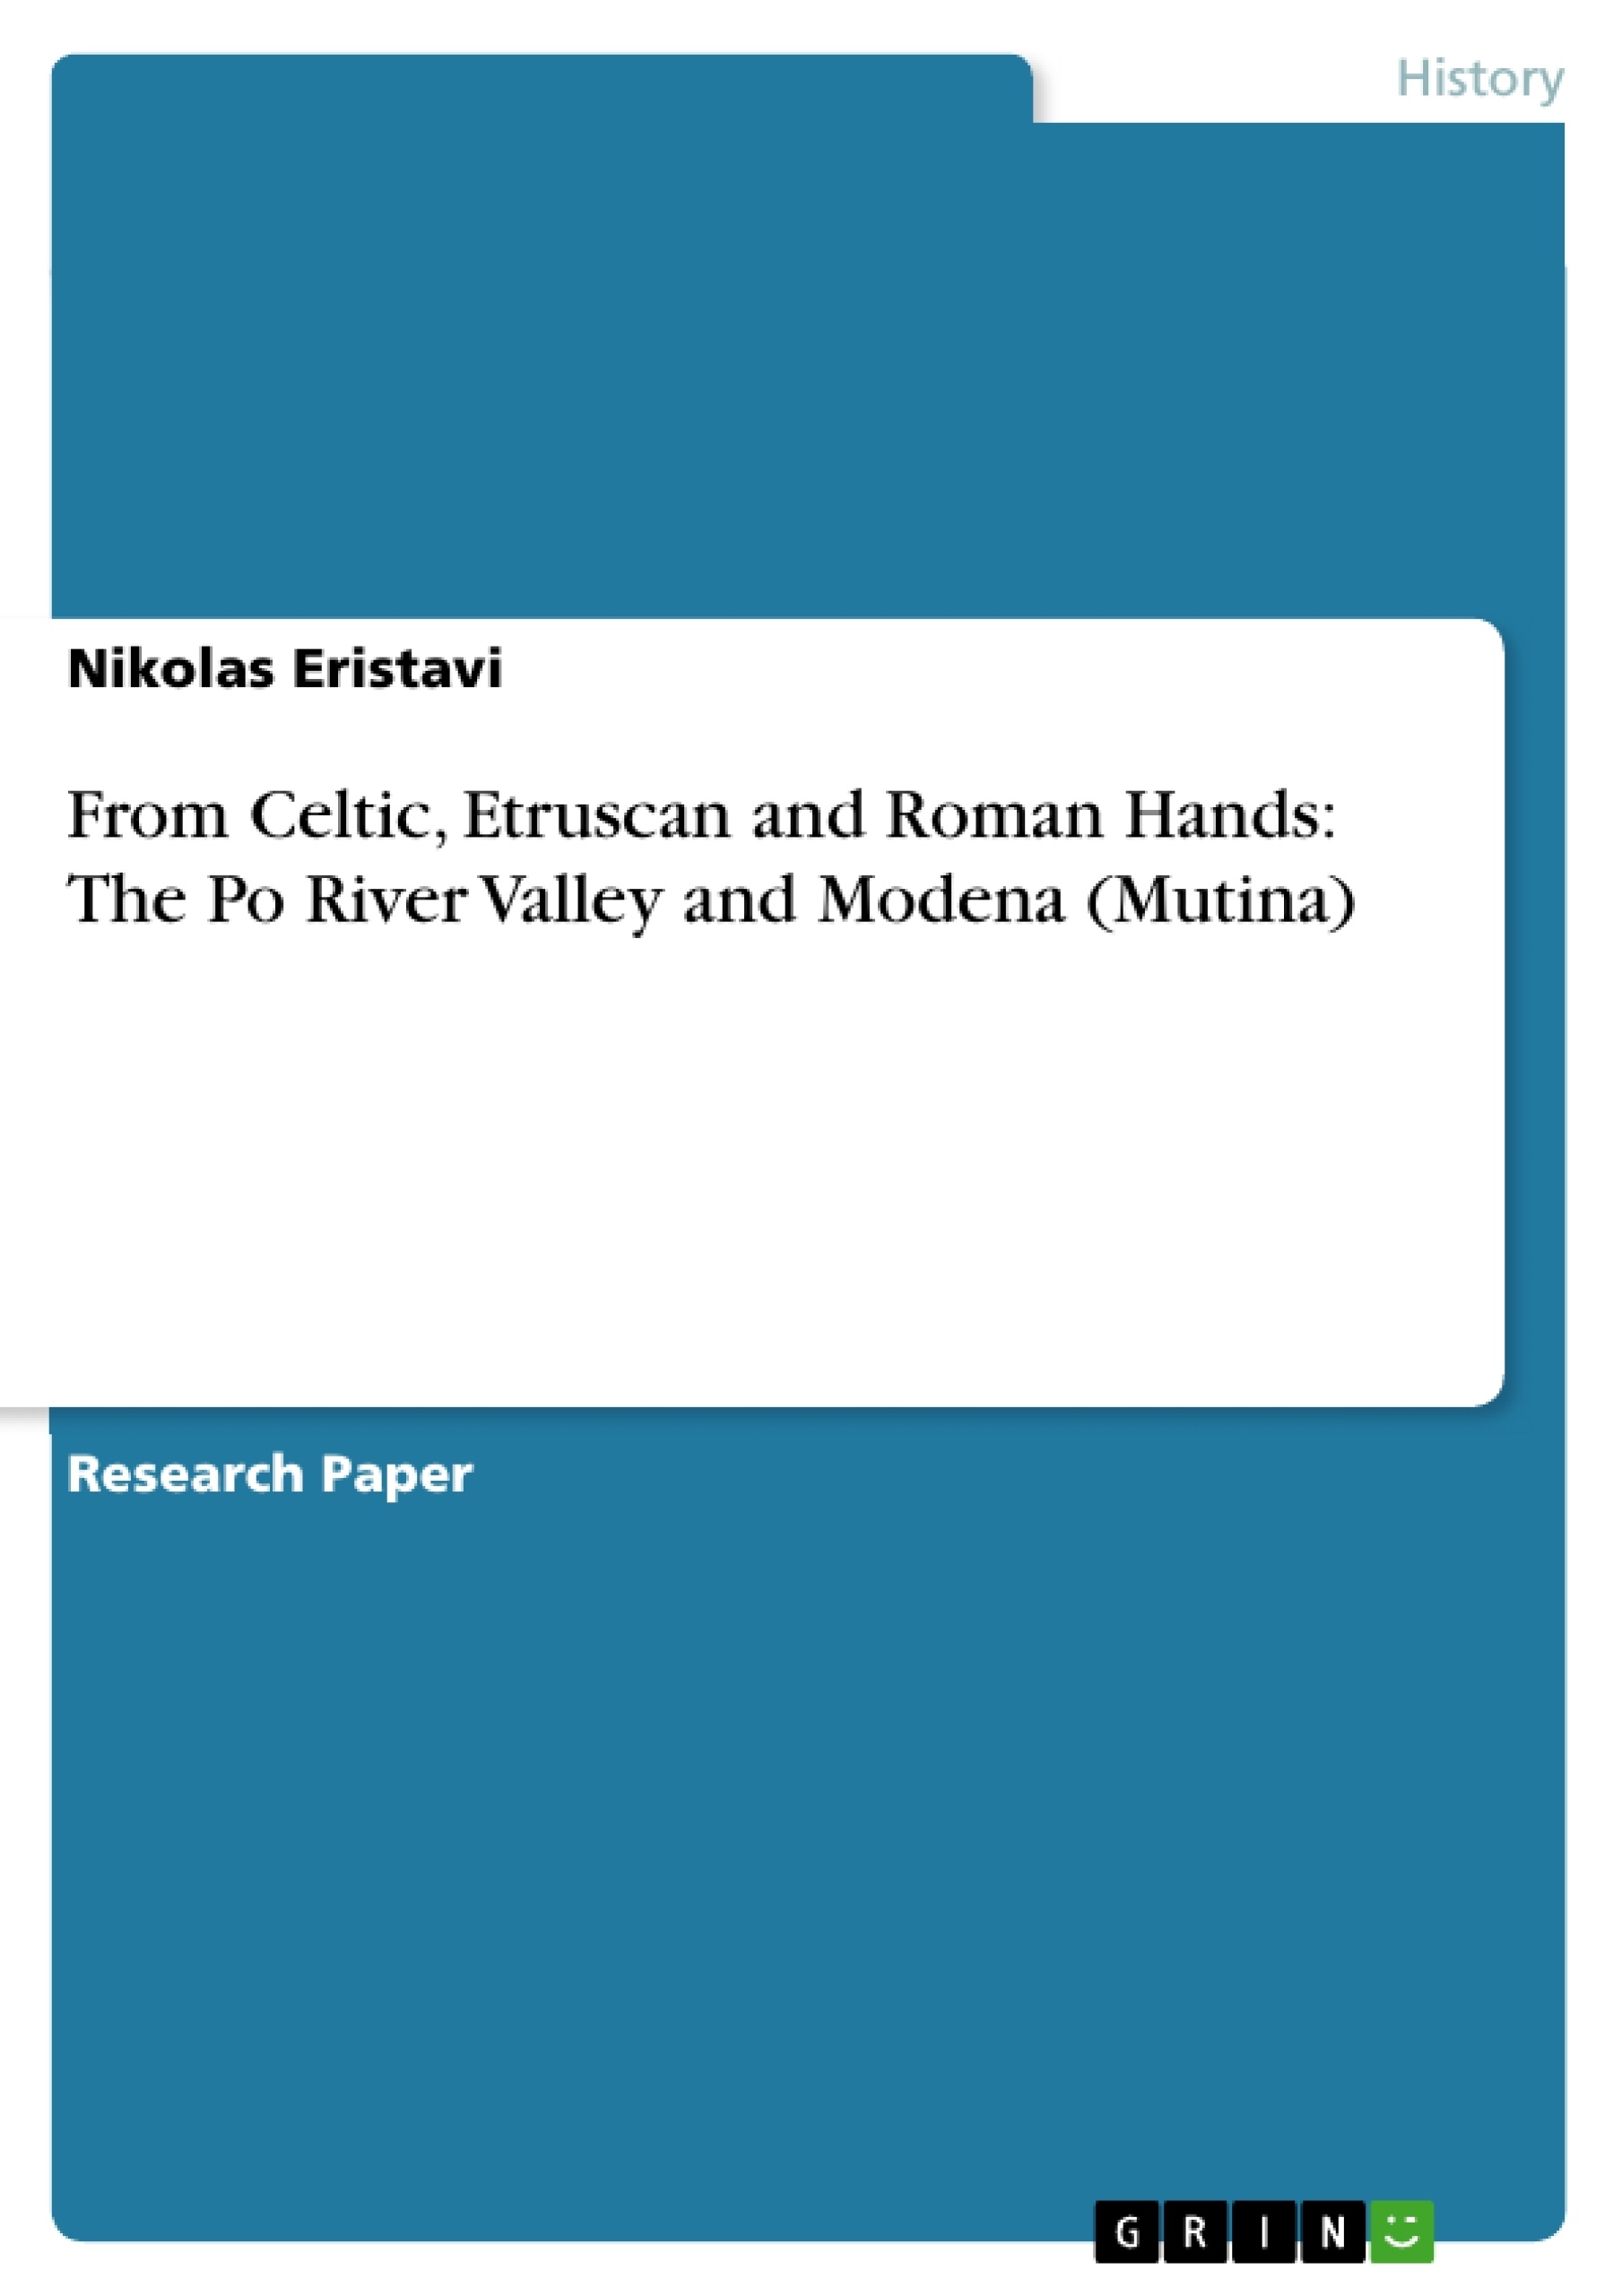 Titre: From Celtic, Etruscan and Roman Hands: The Po River Valley and Modena (Mutina)